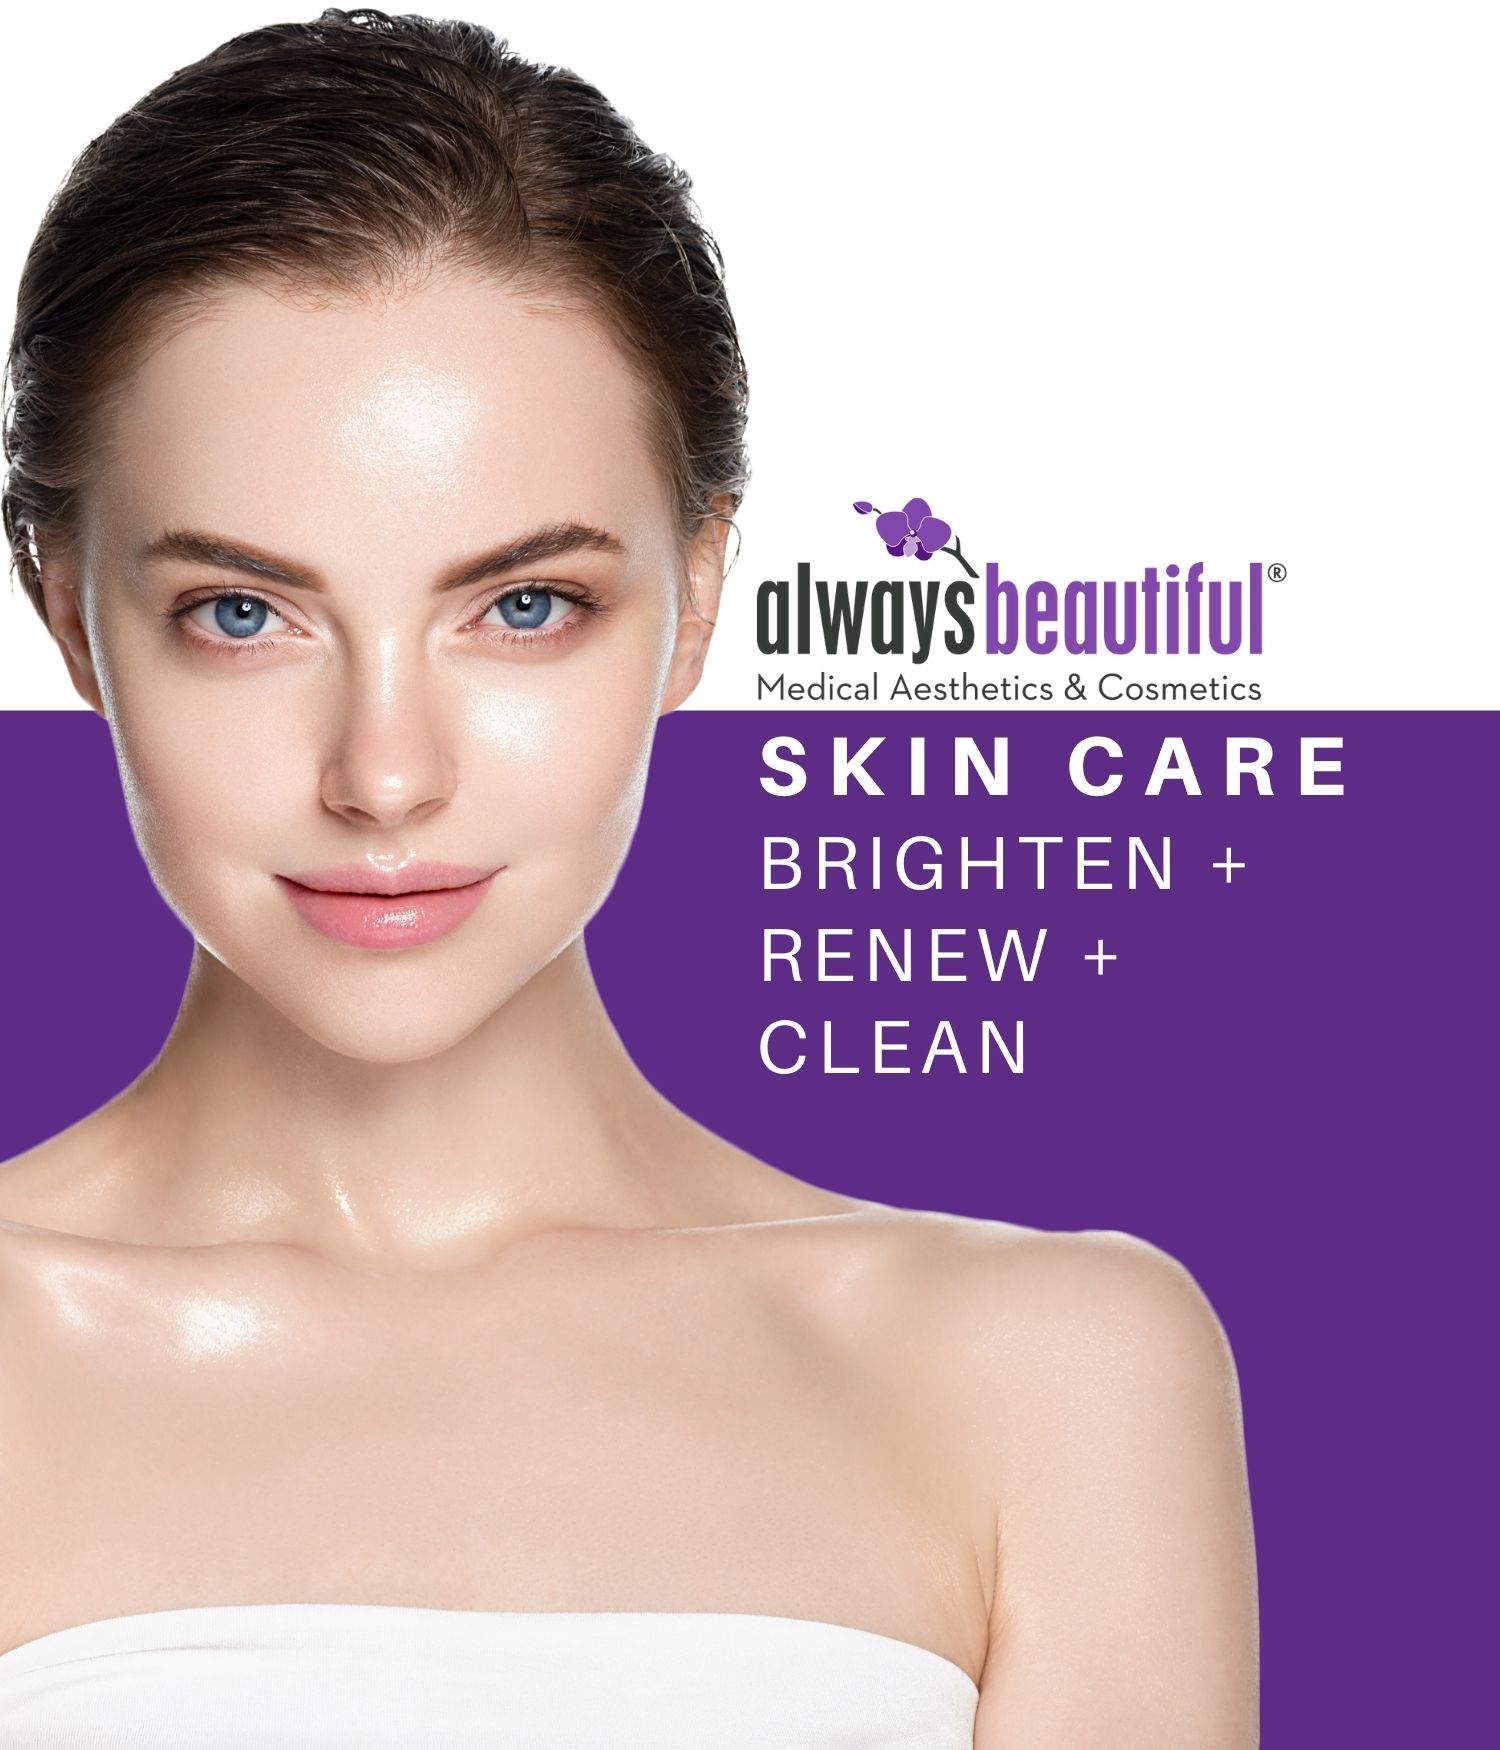 Woman with brightened and renewed skin after skincare treatment at Always beautiful.